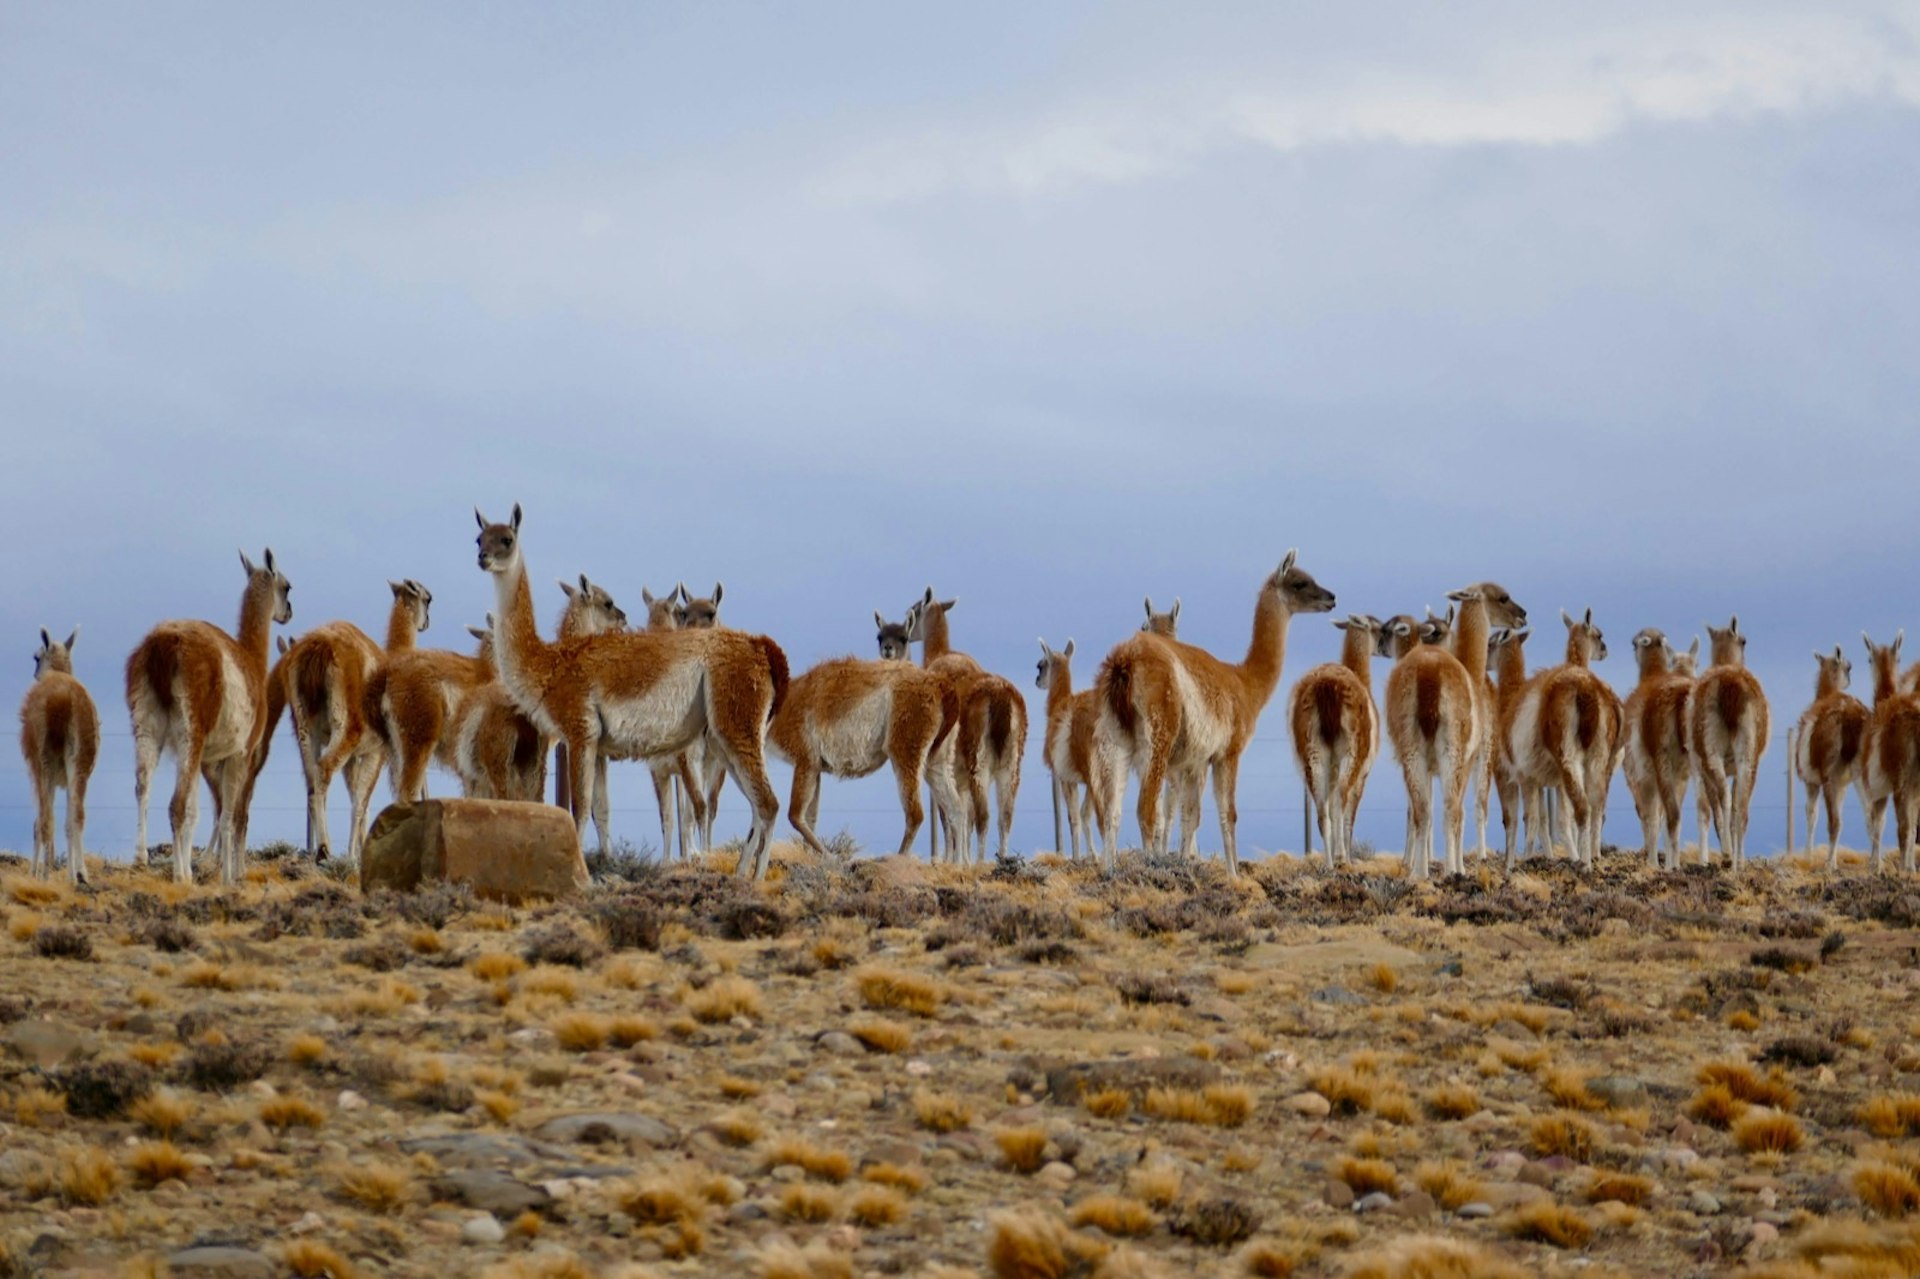 A herd of guanacos atop a ridgeline under a blue sky in Argentina's Patagonia National Park